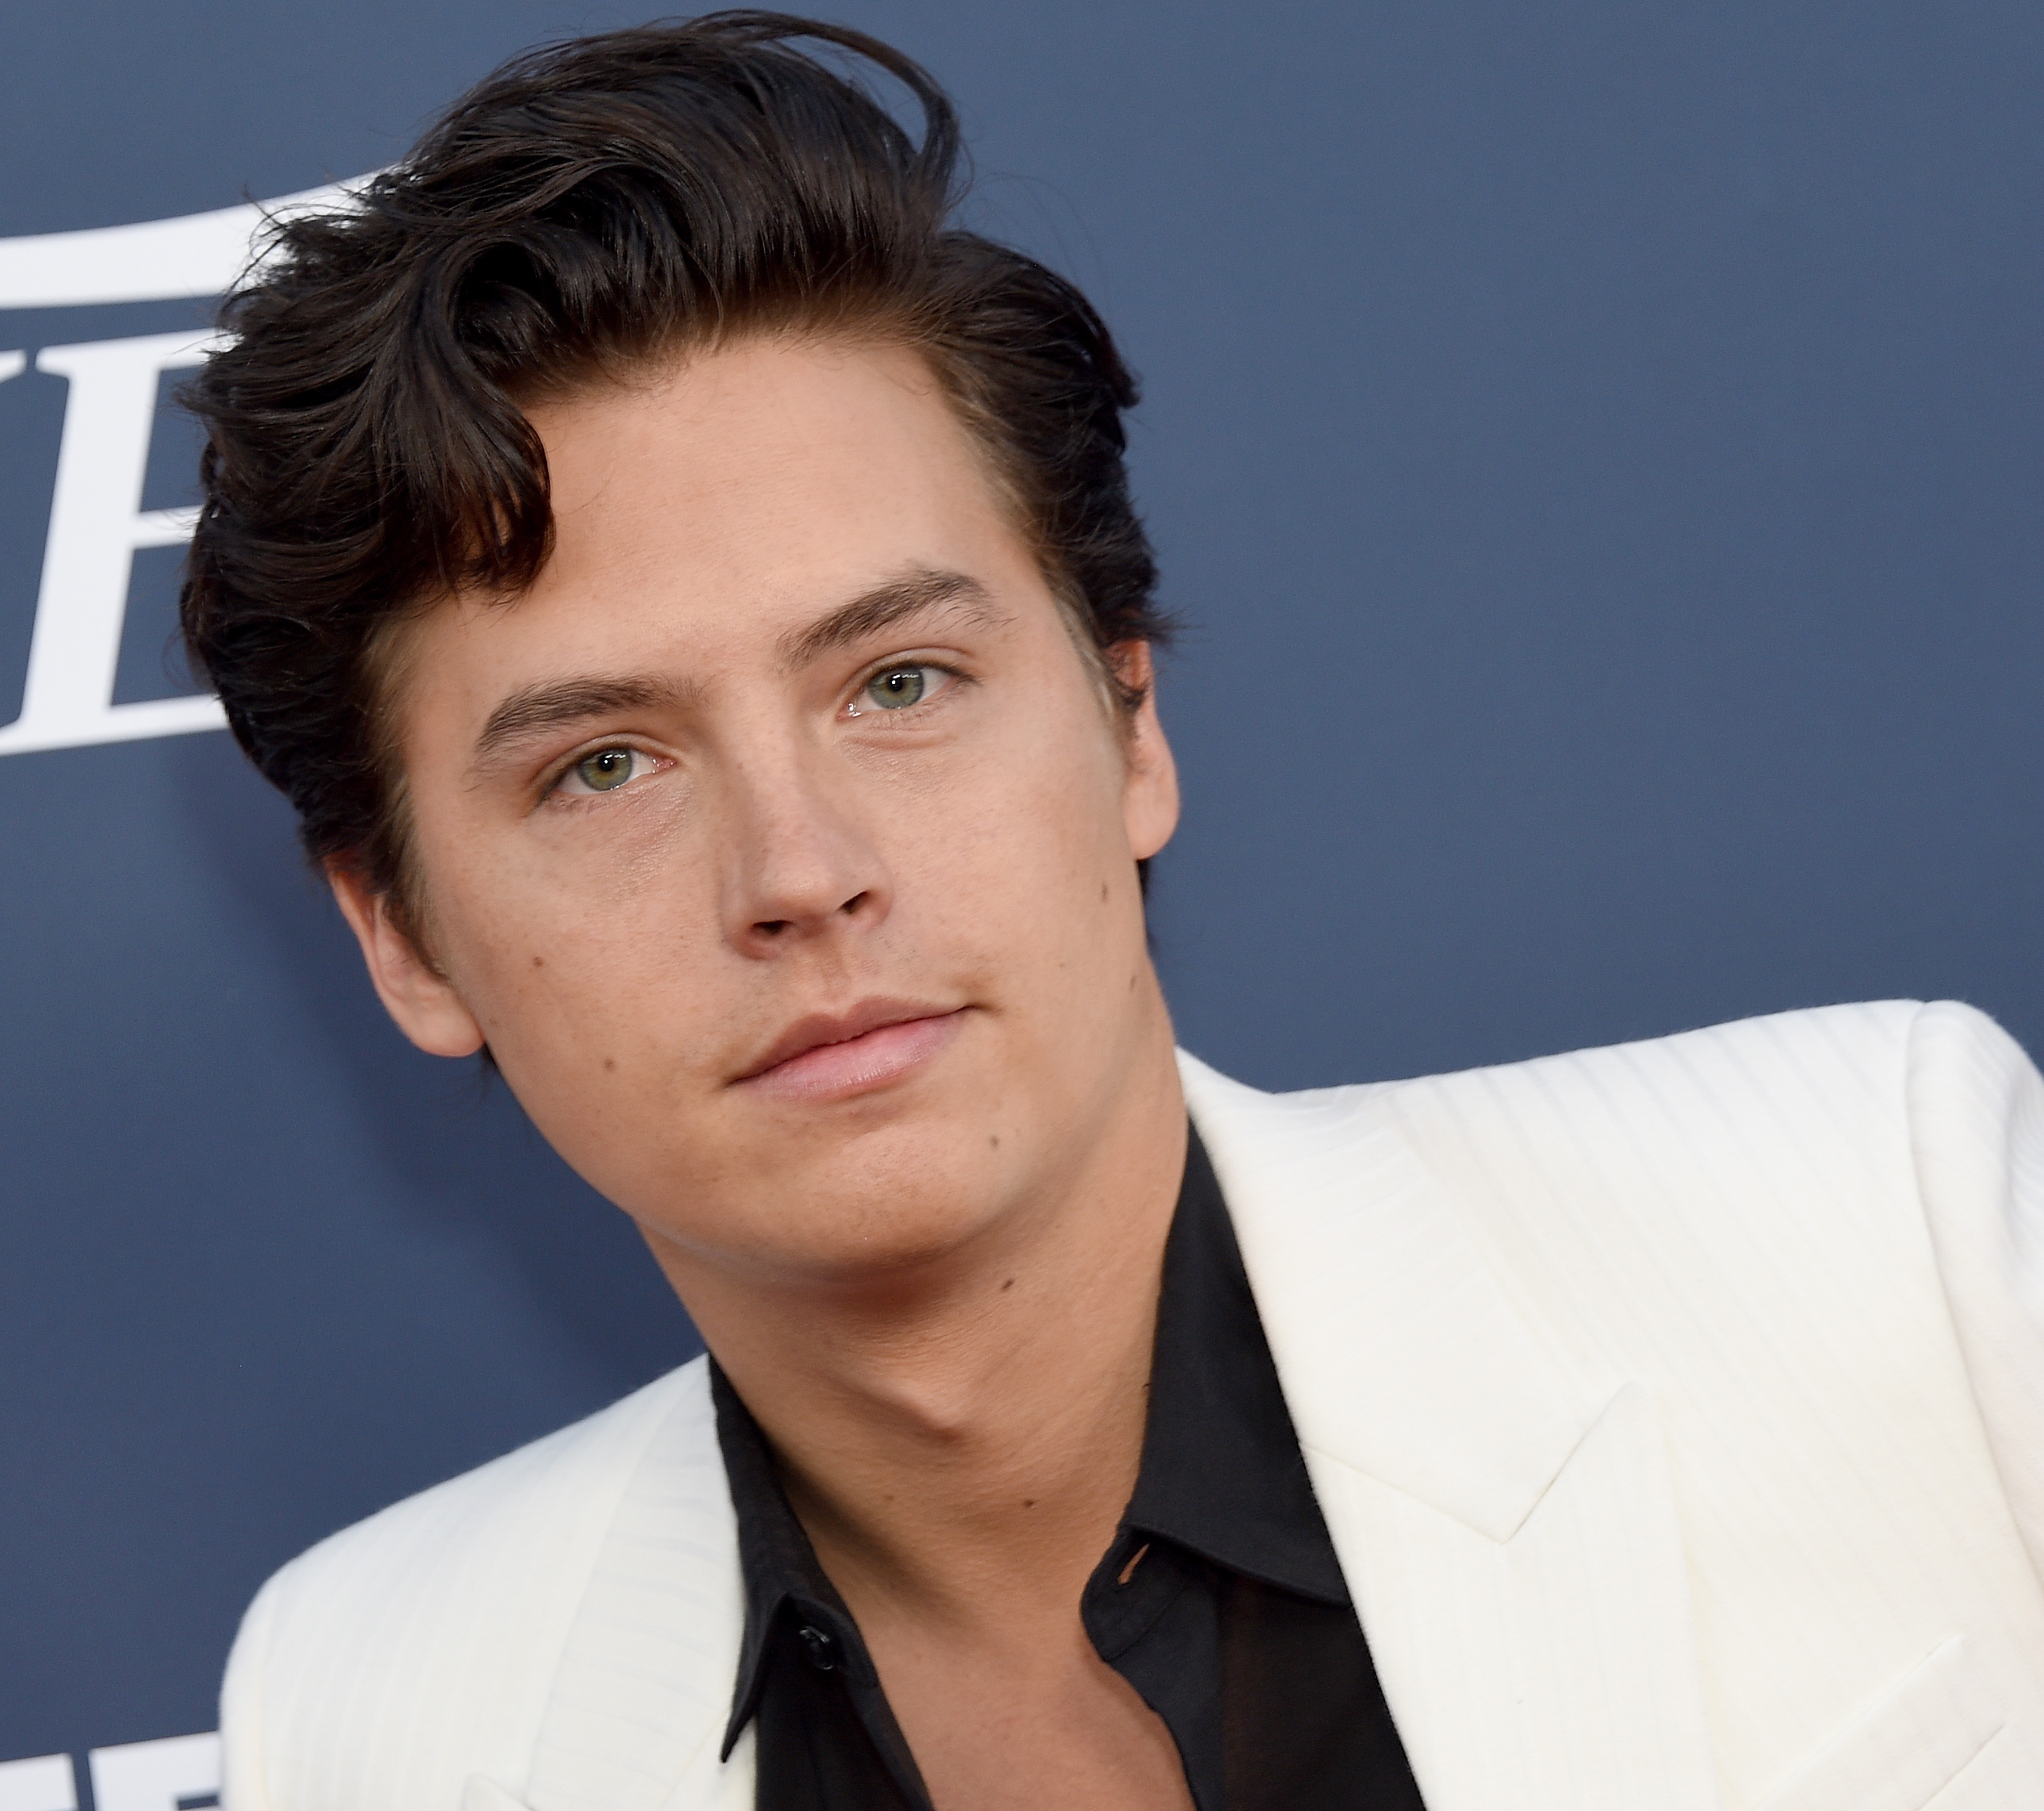 Cole Sprouse beim Variety's Power Of Young Hollywood Event im The H Club in Los Angeles, Kalifornien, Los Angeles am 6. August 2019. | Quelle: Getty Images